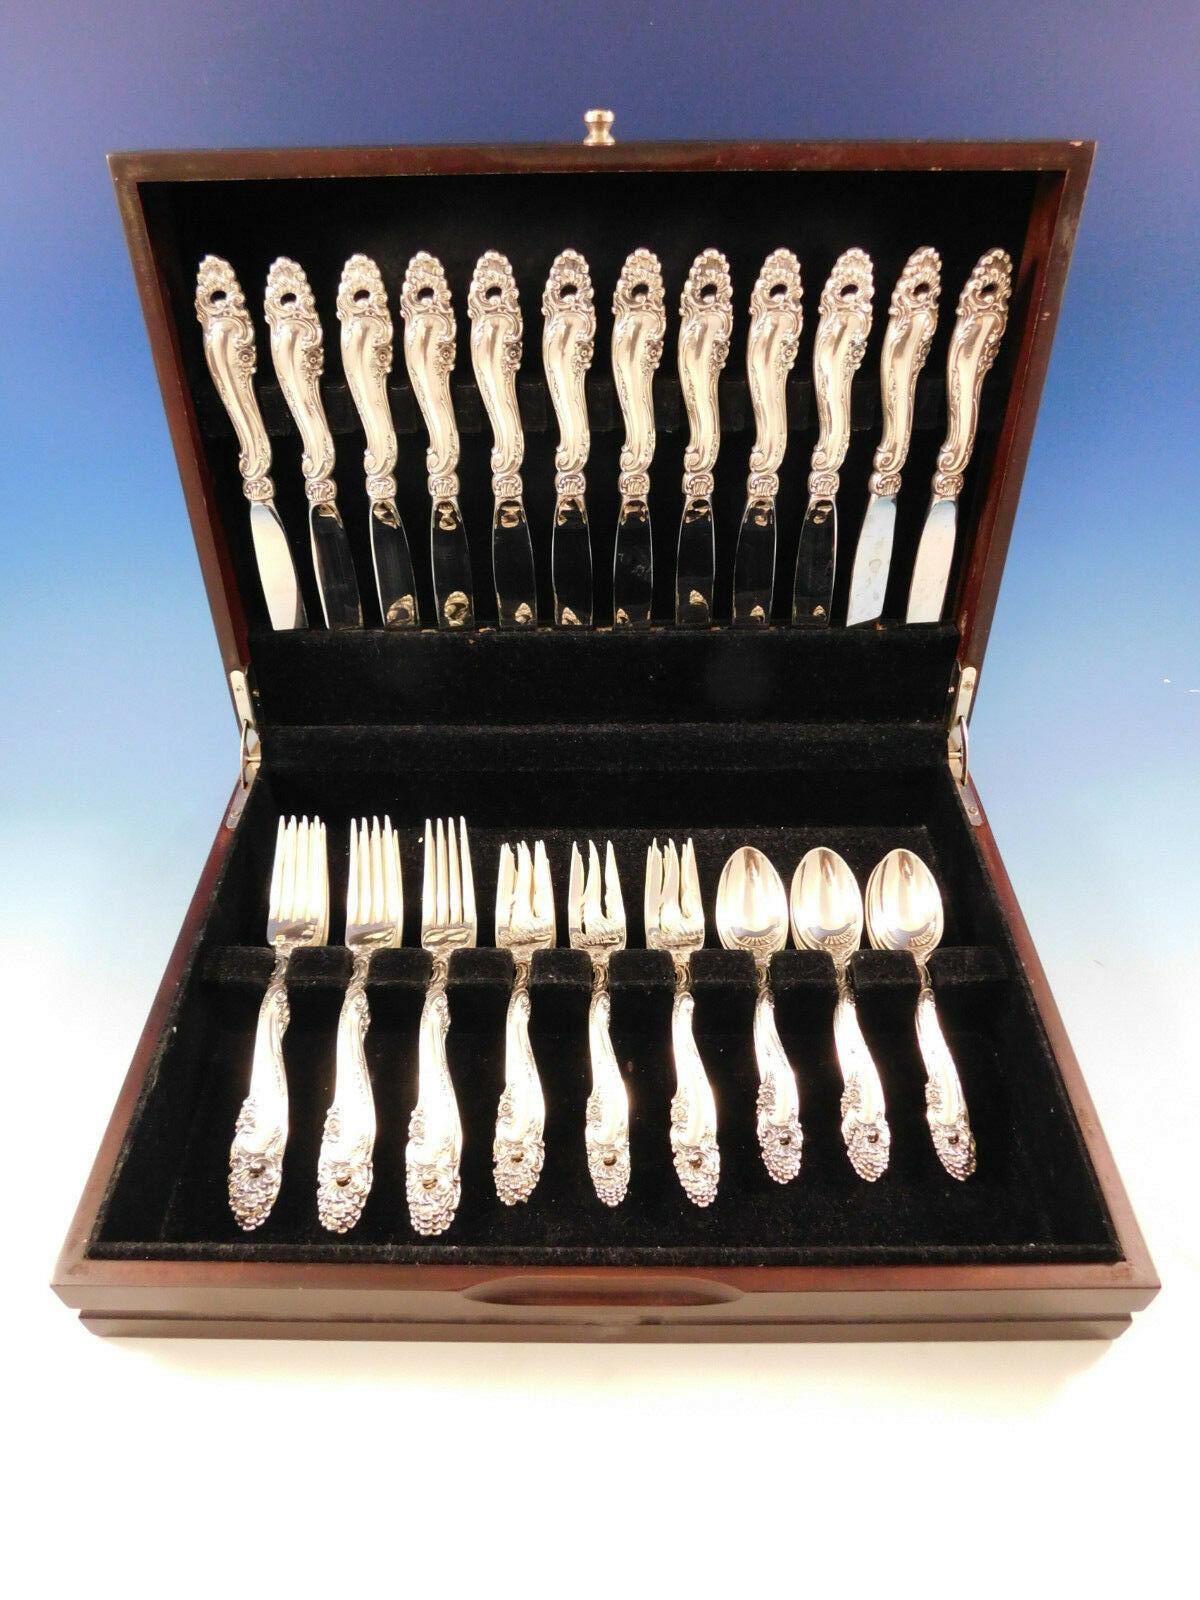 Decor by Gorham sterling silver flatware set of 48 pieces. This set includes:

12 knives, 9